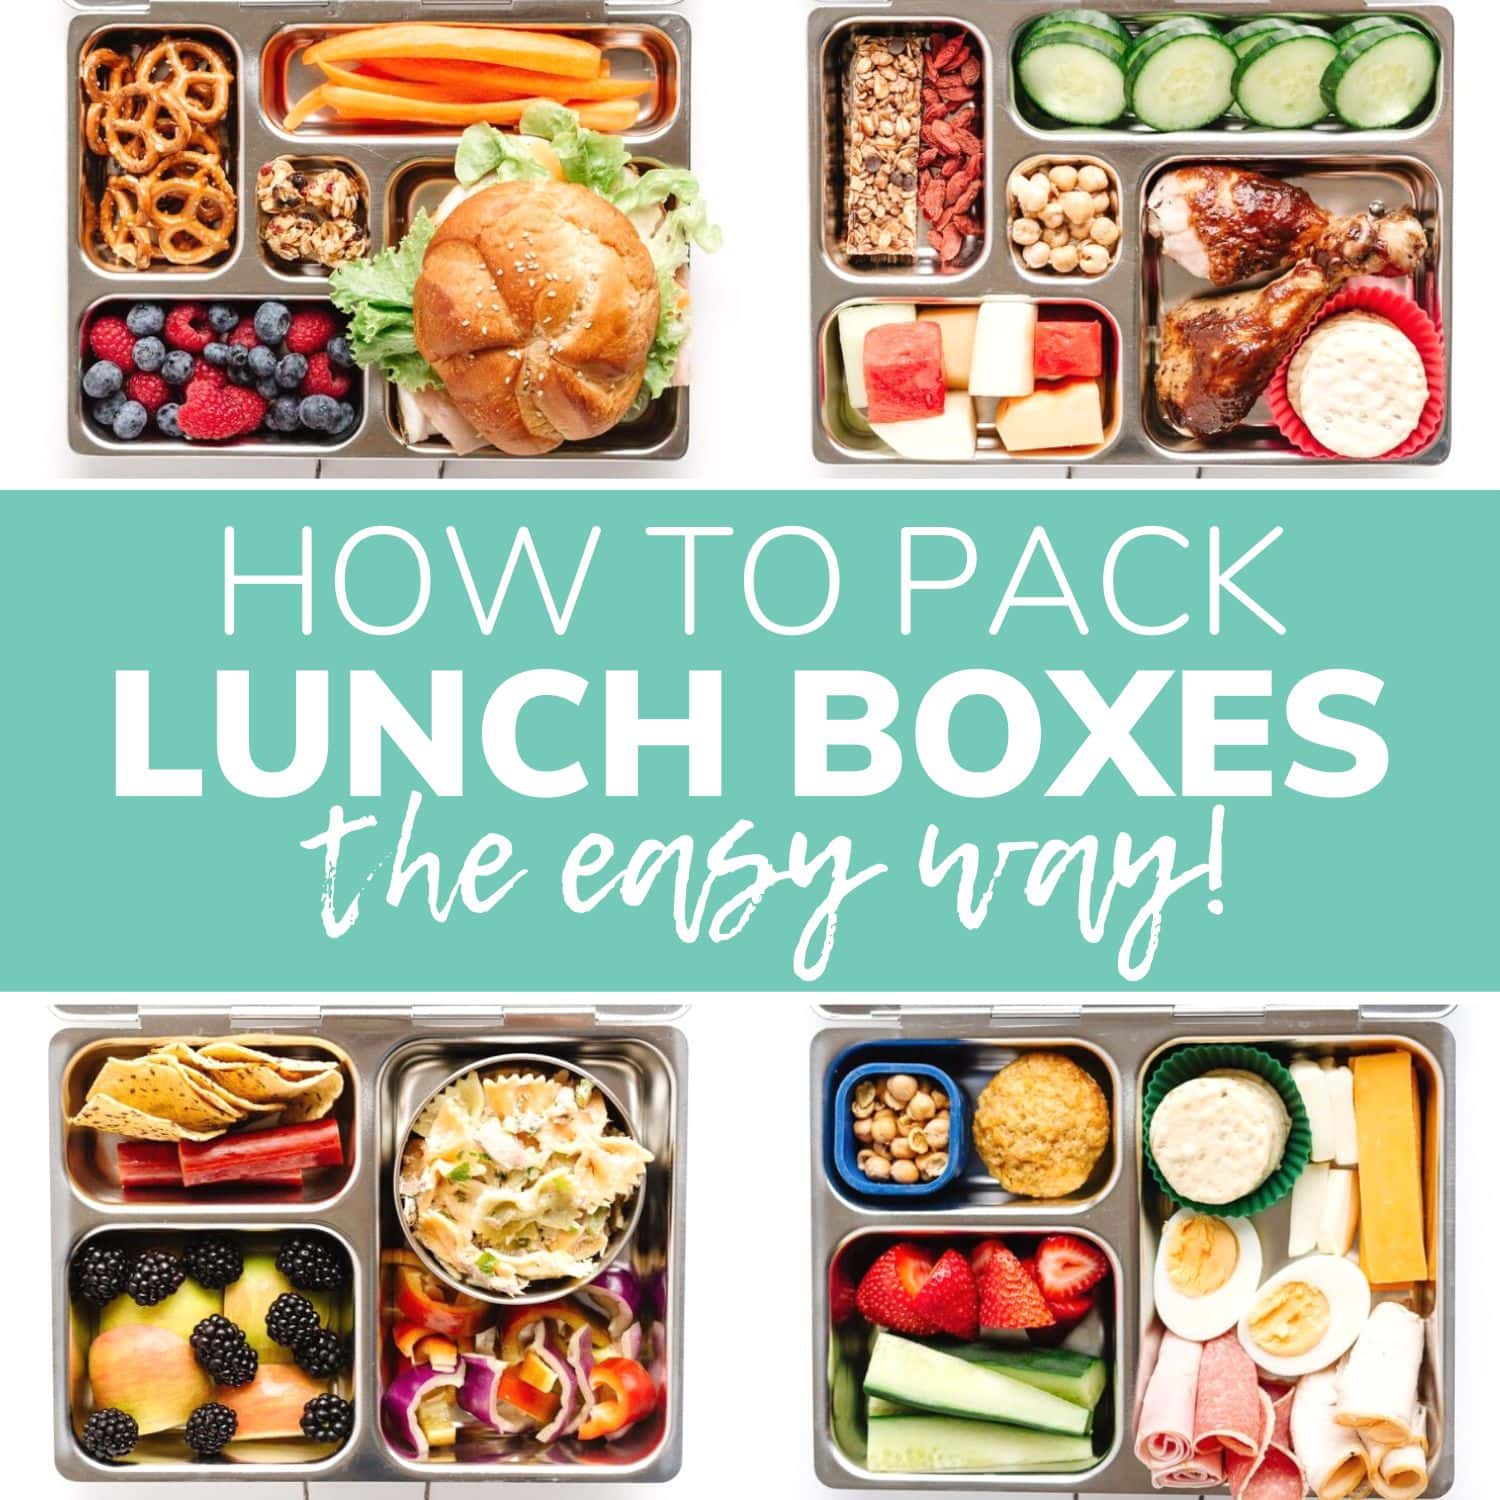 https://www.mapleandmango.com/wp-content/uploads/2019/09/packing-lunch-boxes-easy-way-feature.jpg